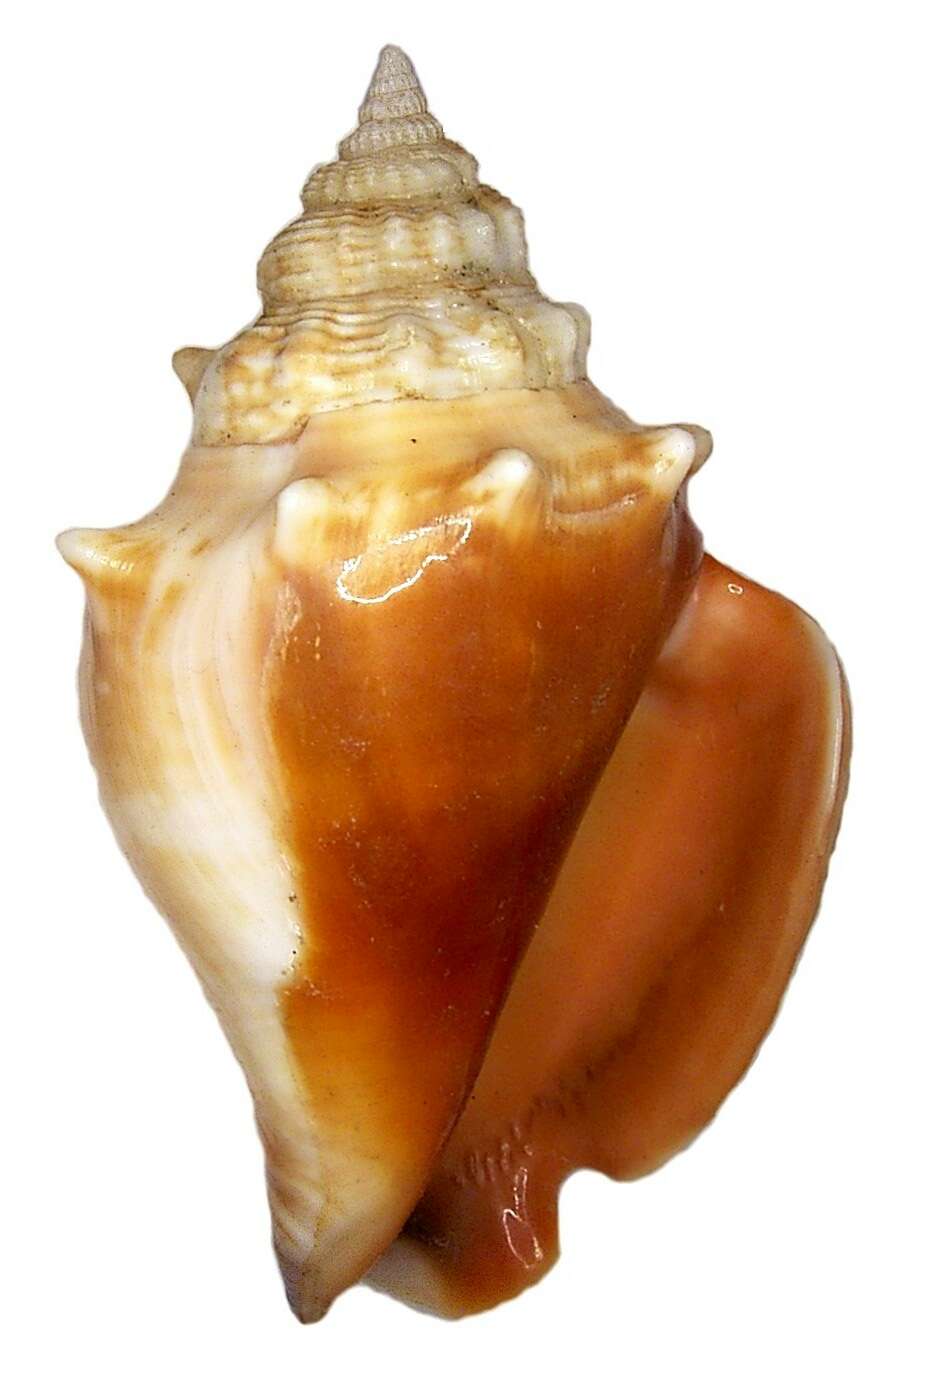 Image of Florida fighting conch